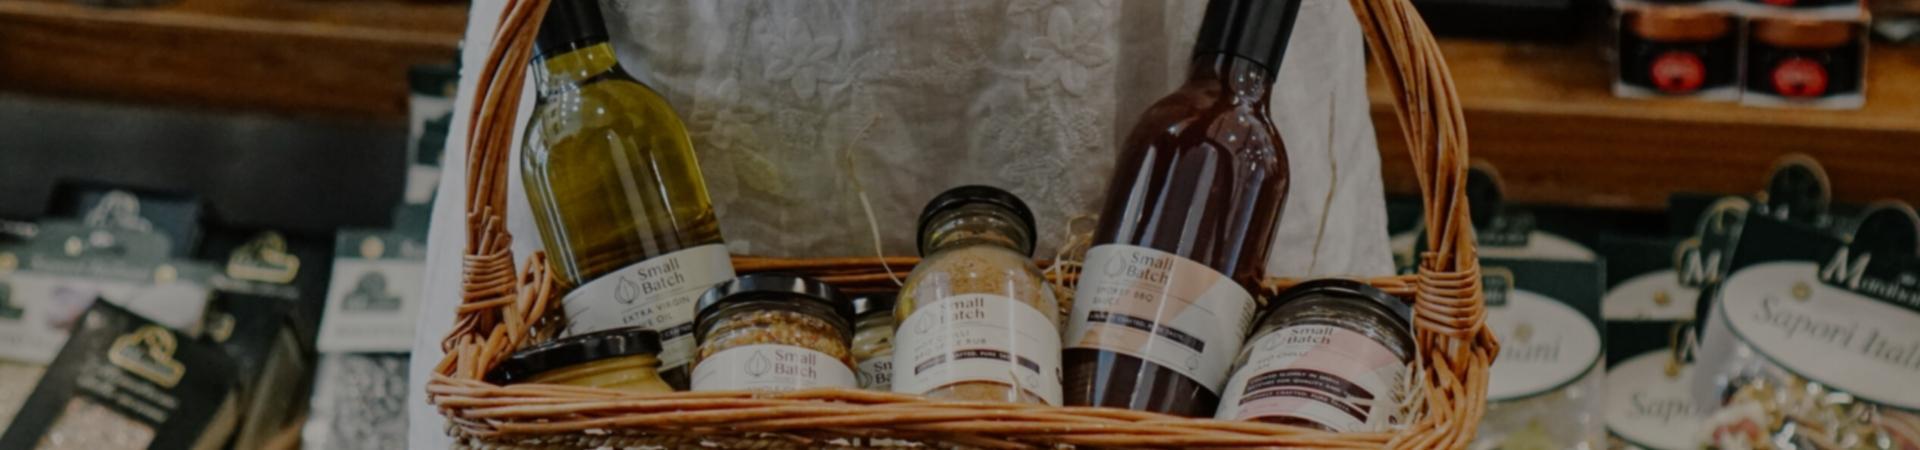 Create Your Own Hamper - The Dempsey Project